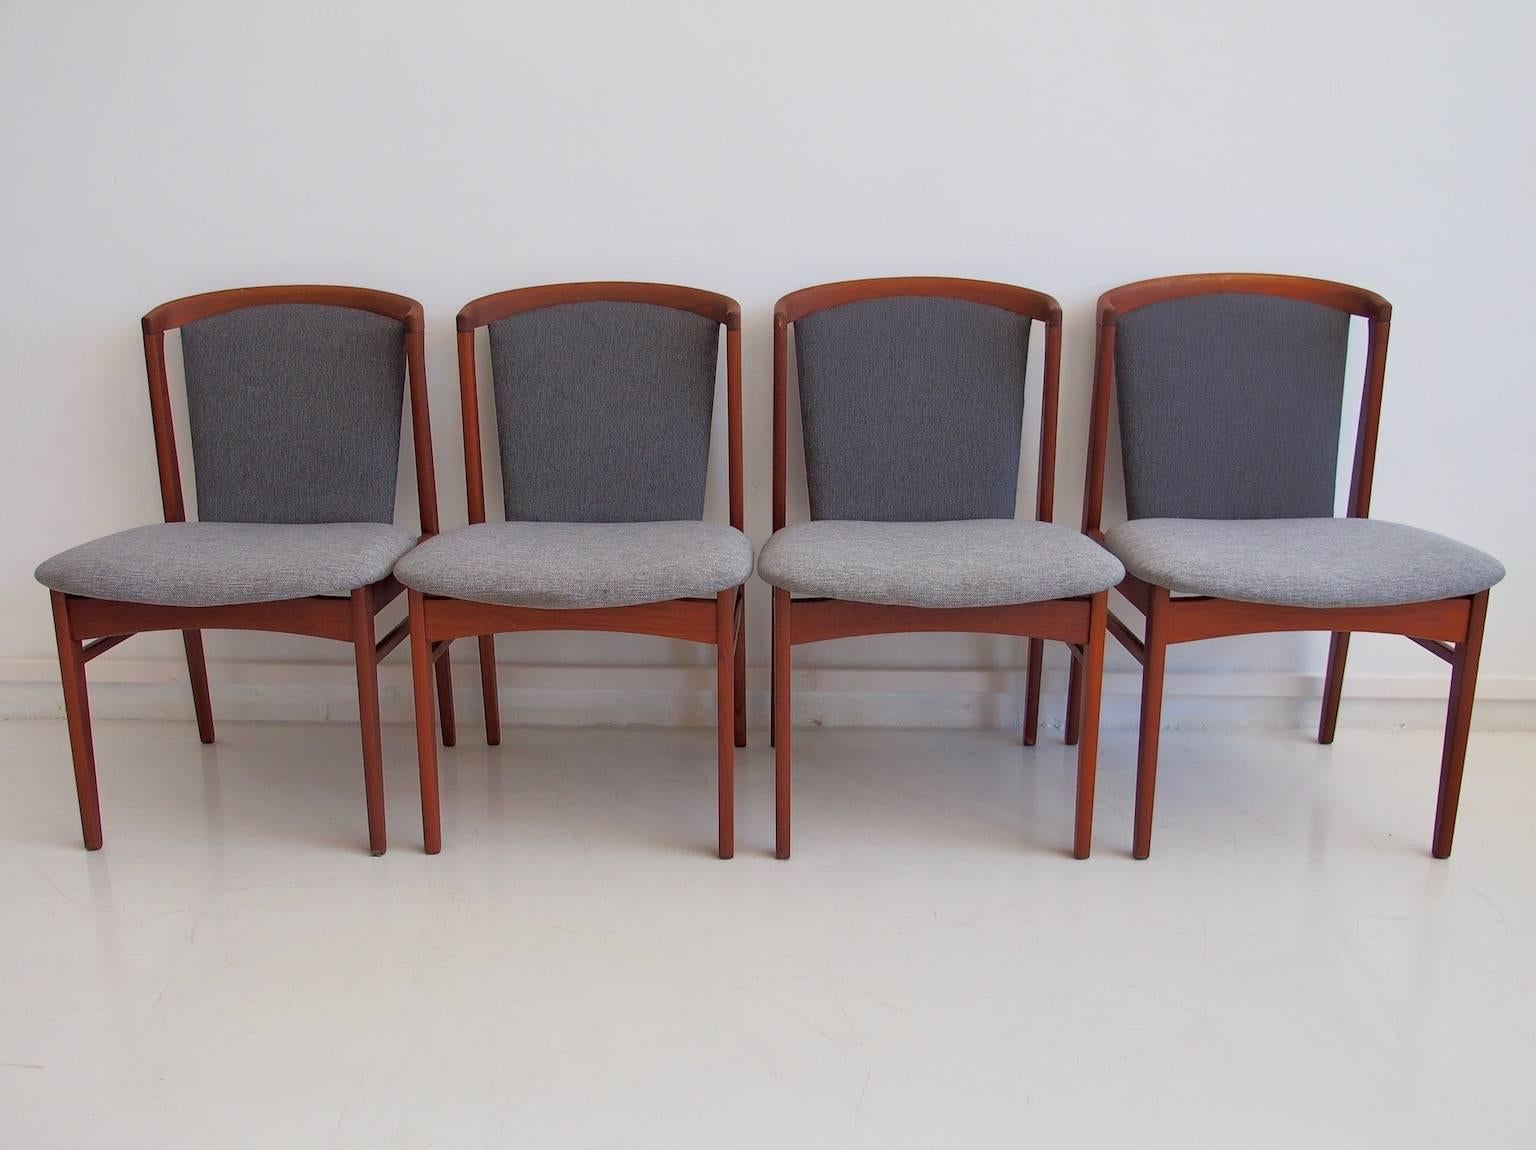 Four teak dining chairs designed by Erik Buch for Christensens Møbelfabrik, Vamdrup. Four-legged teak frame construction, padded back and seat, with new cover melted in light blue and dark blue. Inclined backrest. Dimensions per chair: H. approx. 83